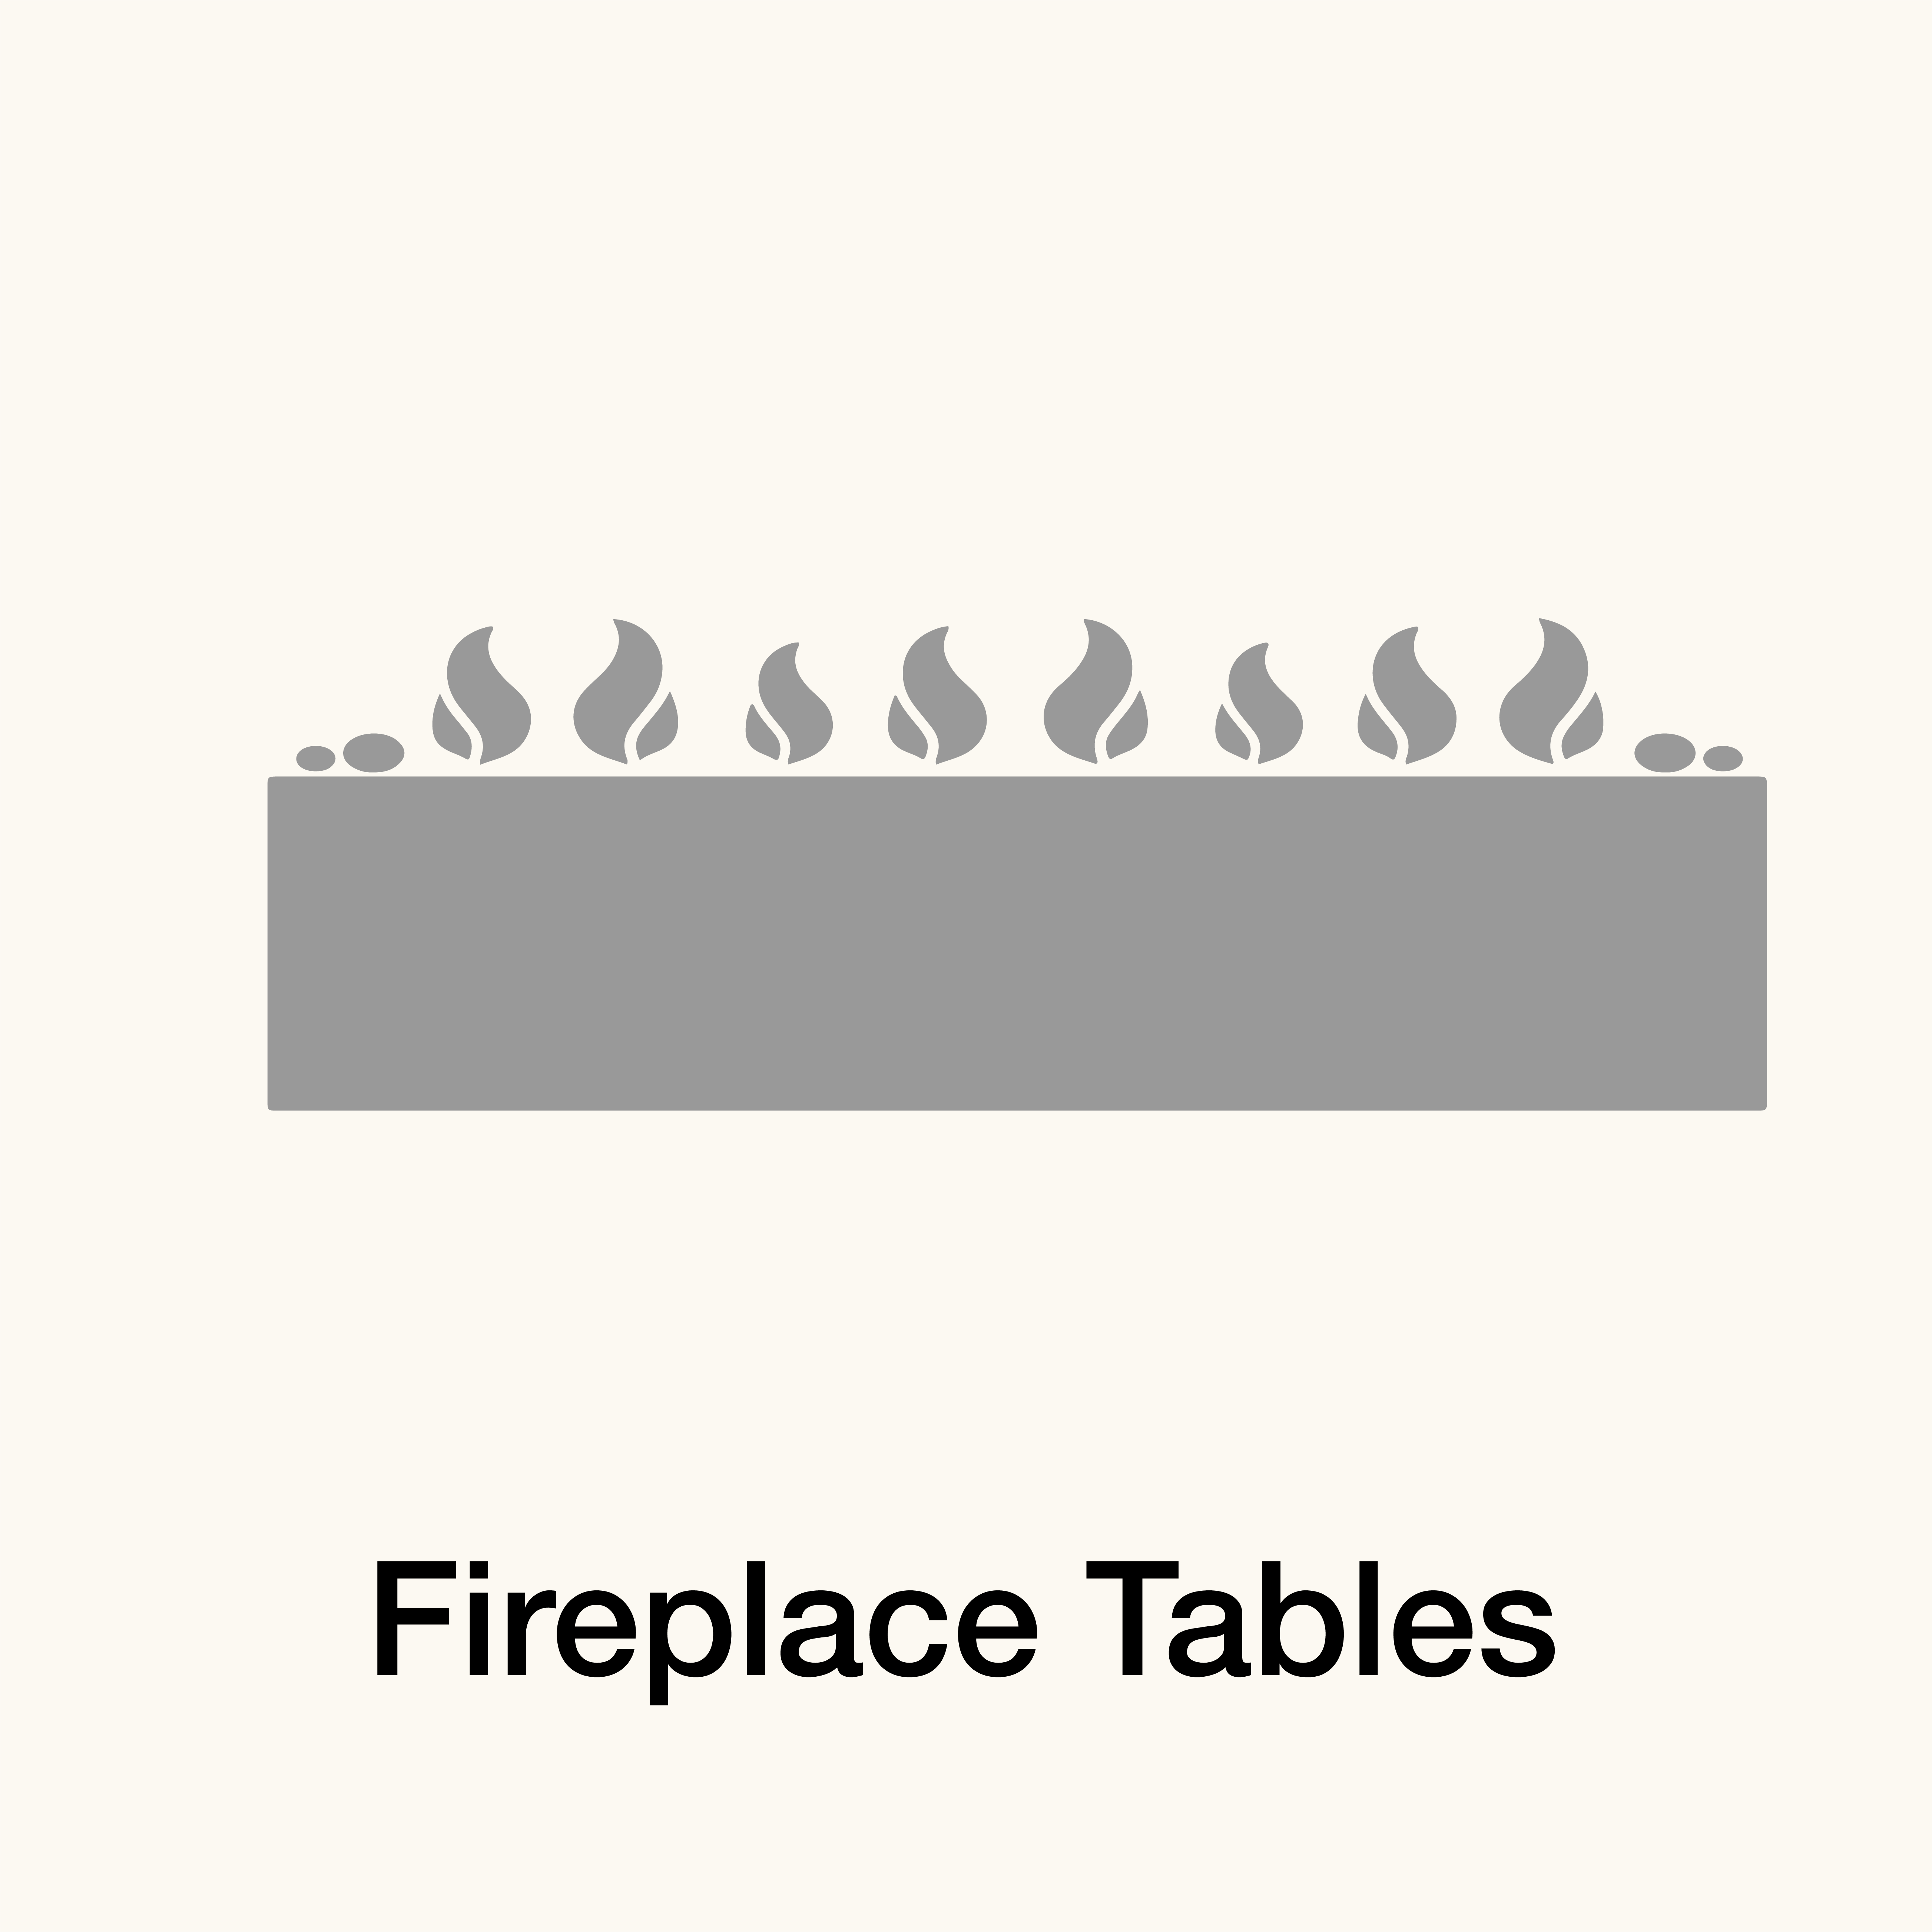 Fireplace Tables